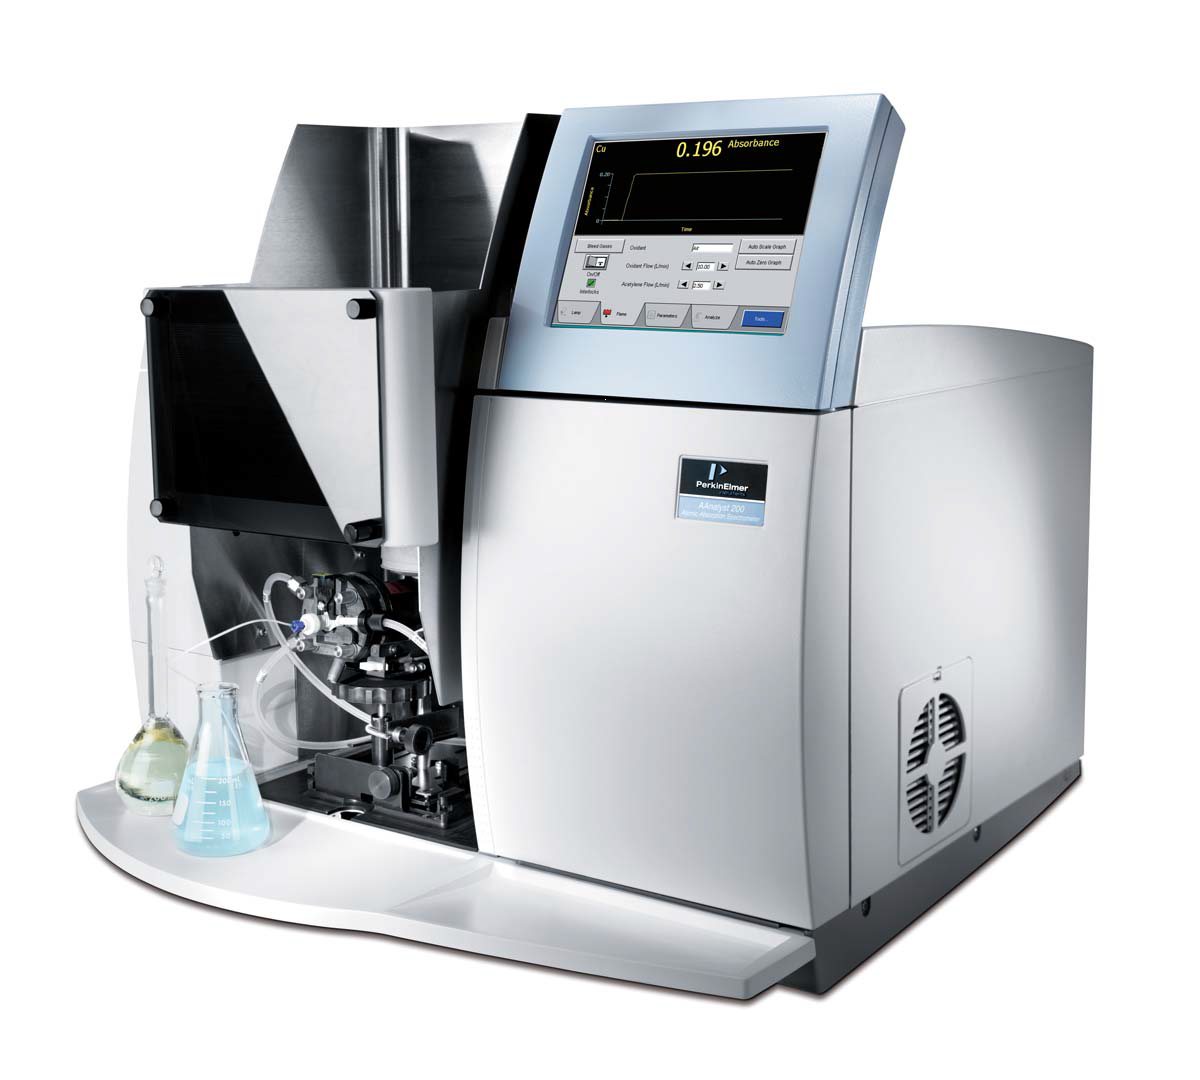 Atomic absorption spectrophotometer price